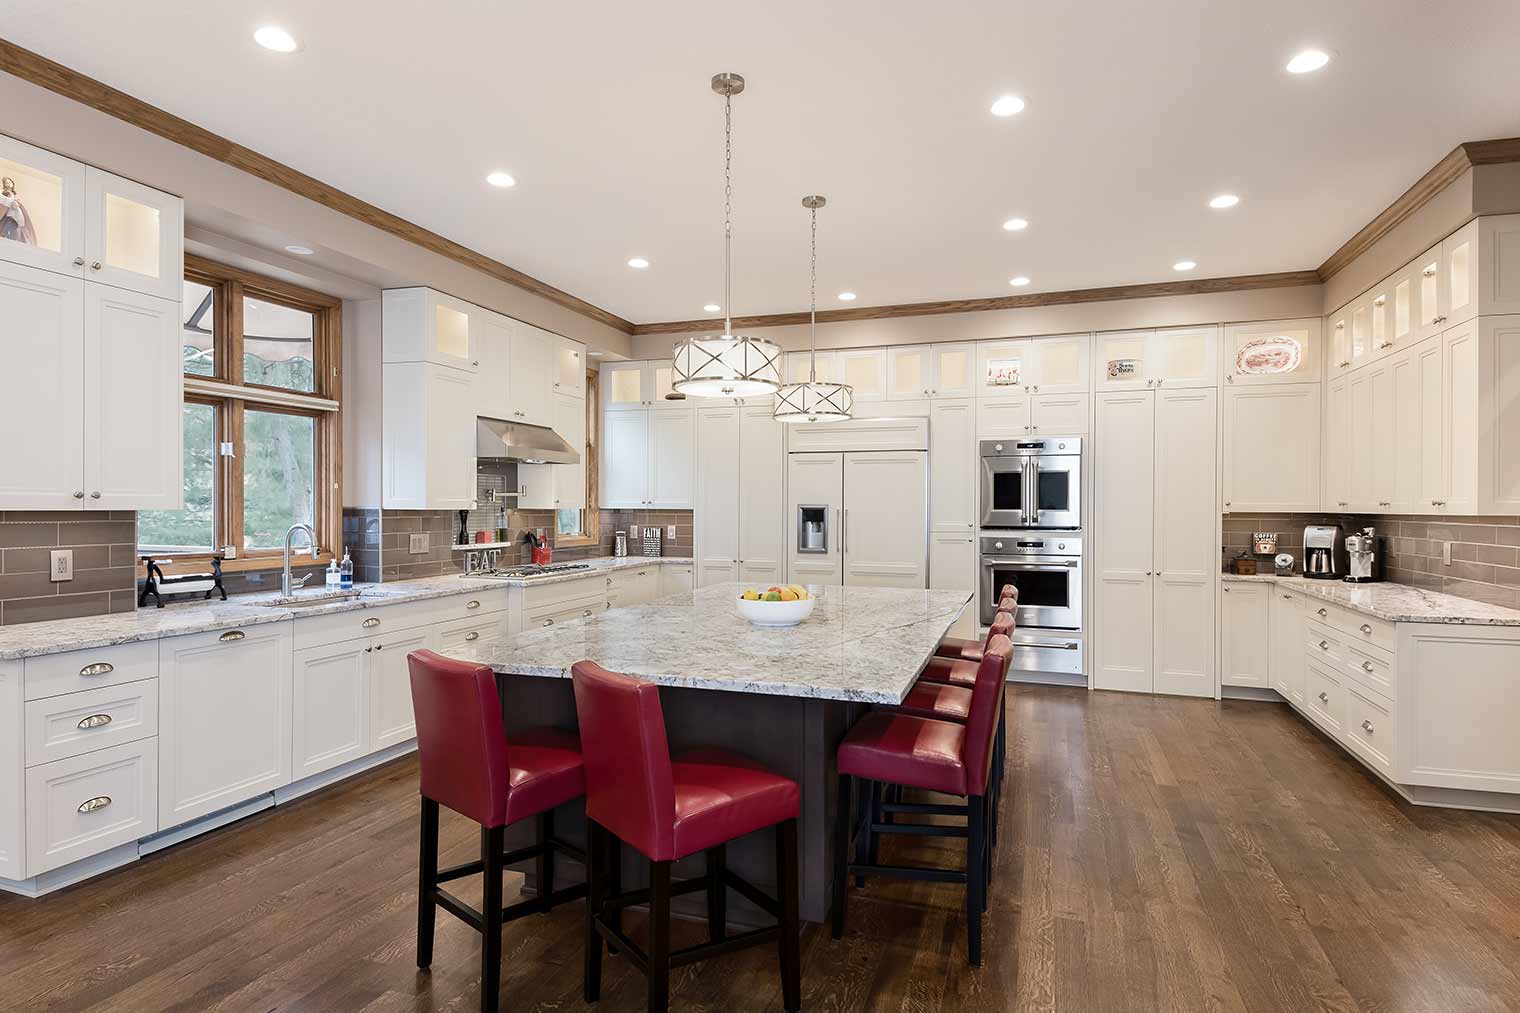 Dark Cherry cabinets & stainless steel appliances in a ...